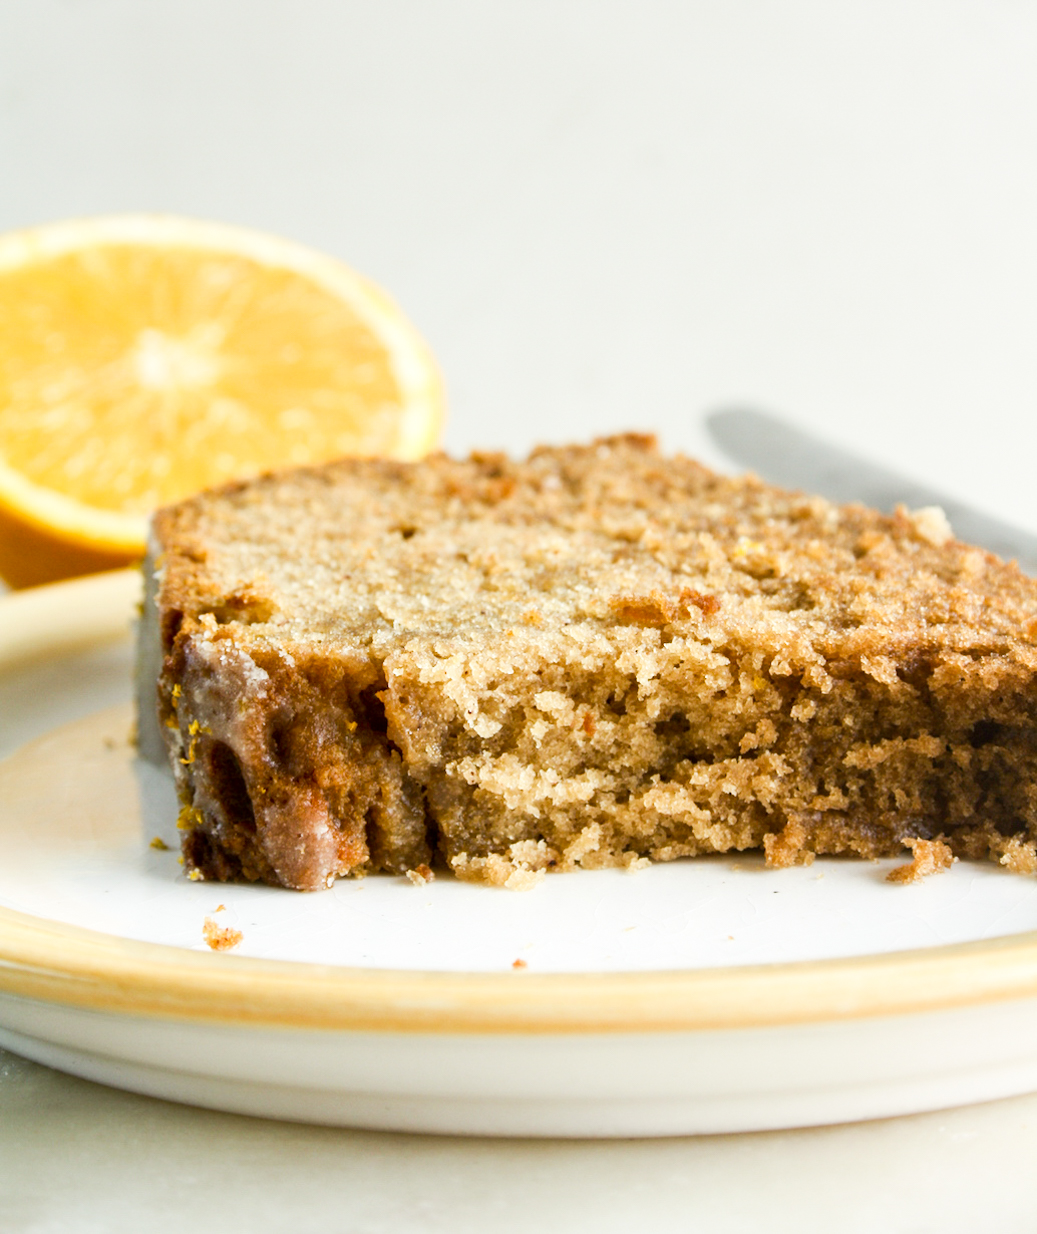 Moist and citrusy spiced ginger cake, with a crackly orange glaze